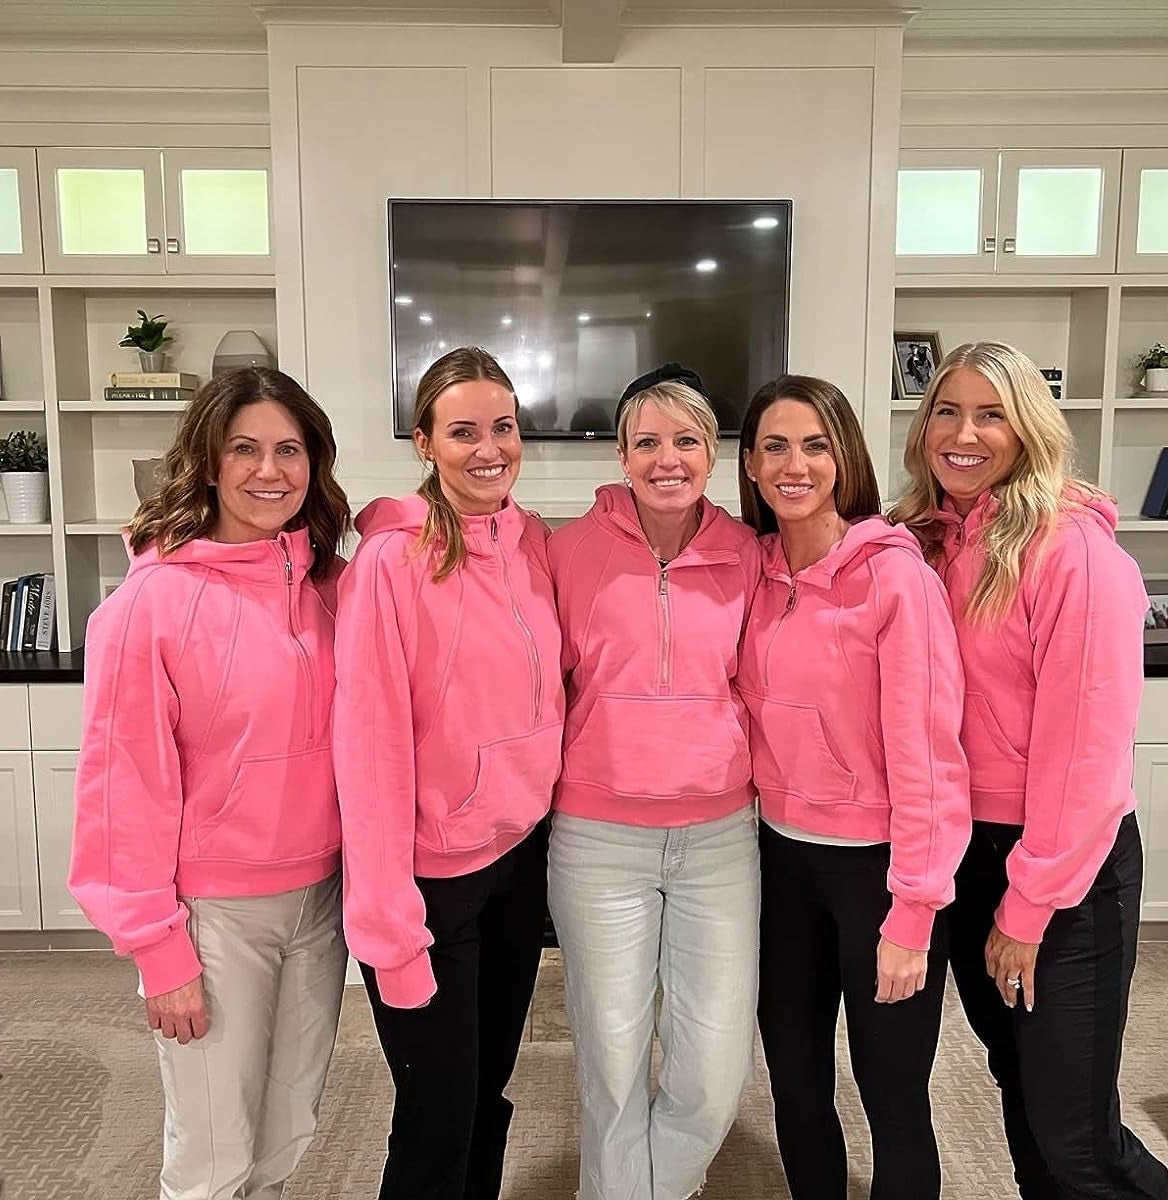 Reviewer and their friends all wearing the pink hoodies